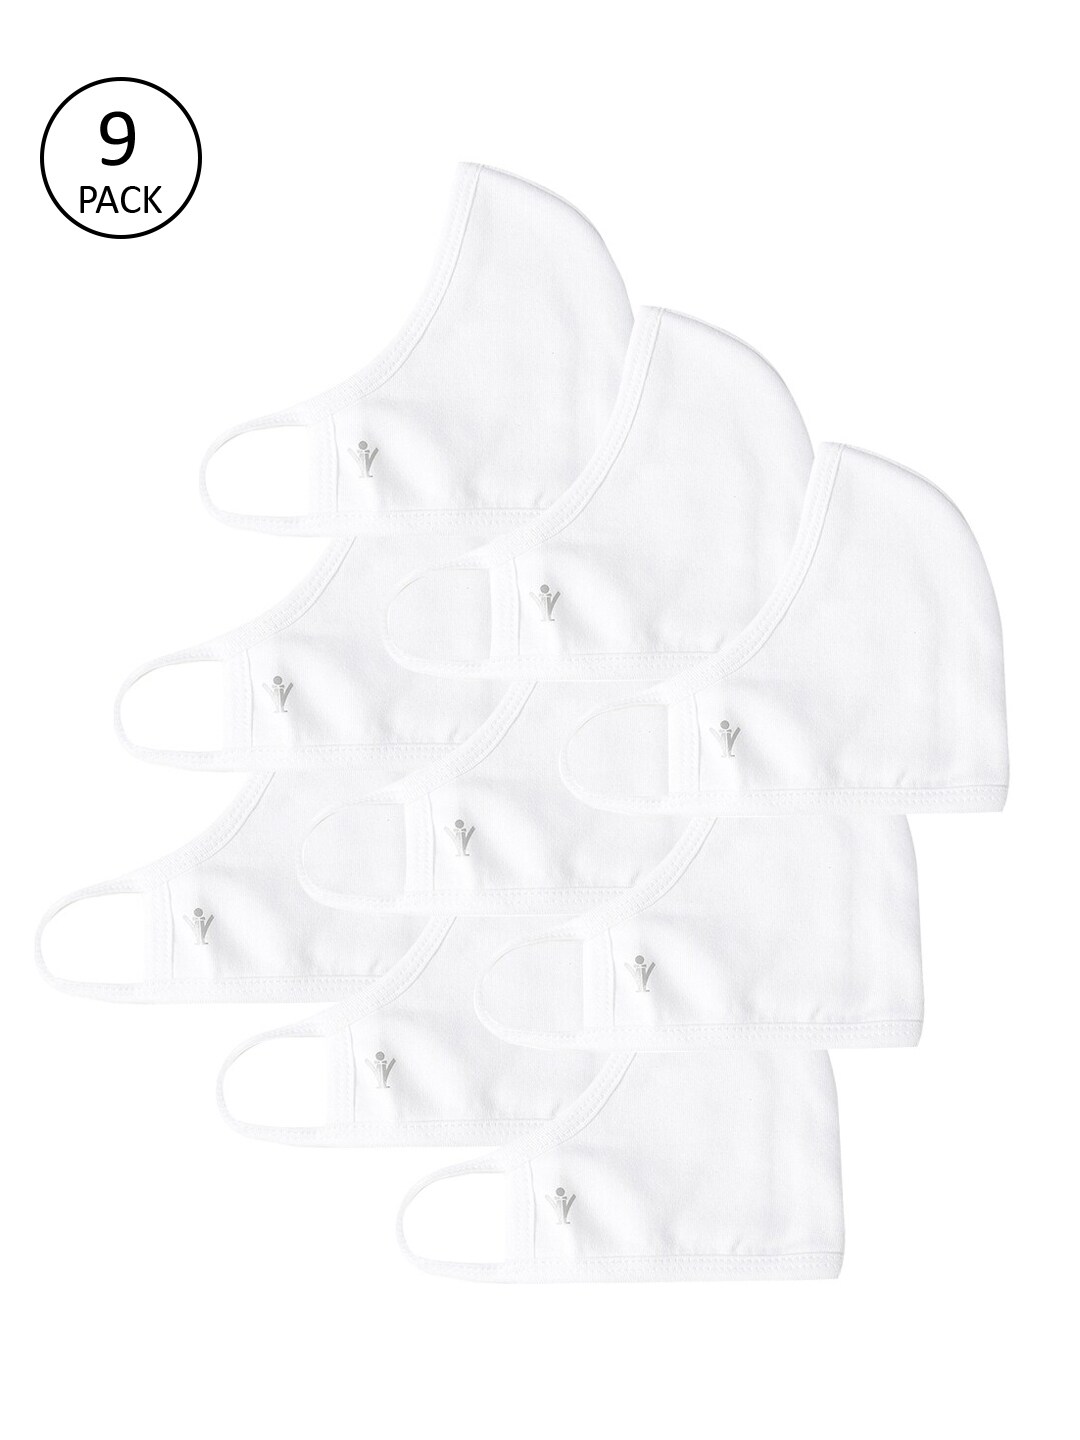 Ramraj Pack Of 9 White Solid 3-Ply Reusable Flexible Cloth Masks Price in India